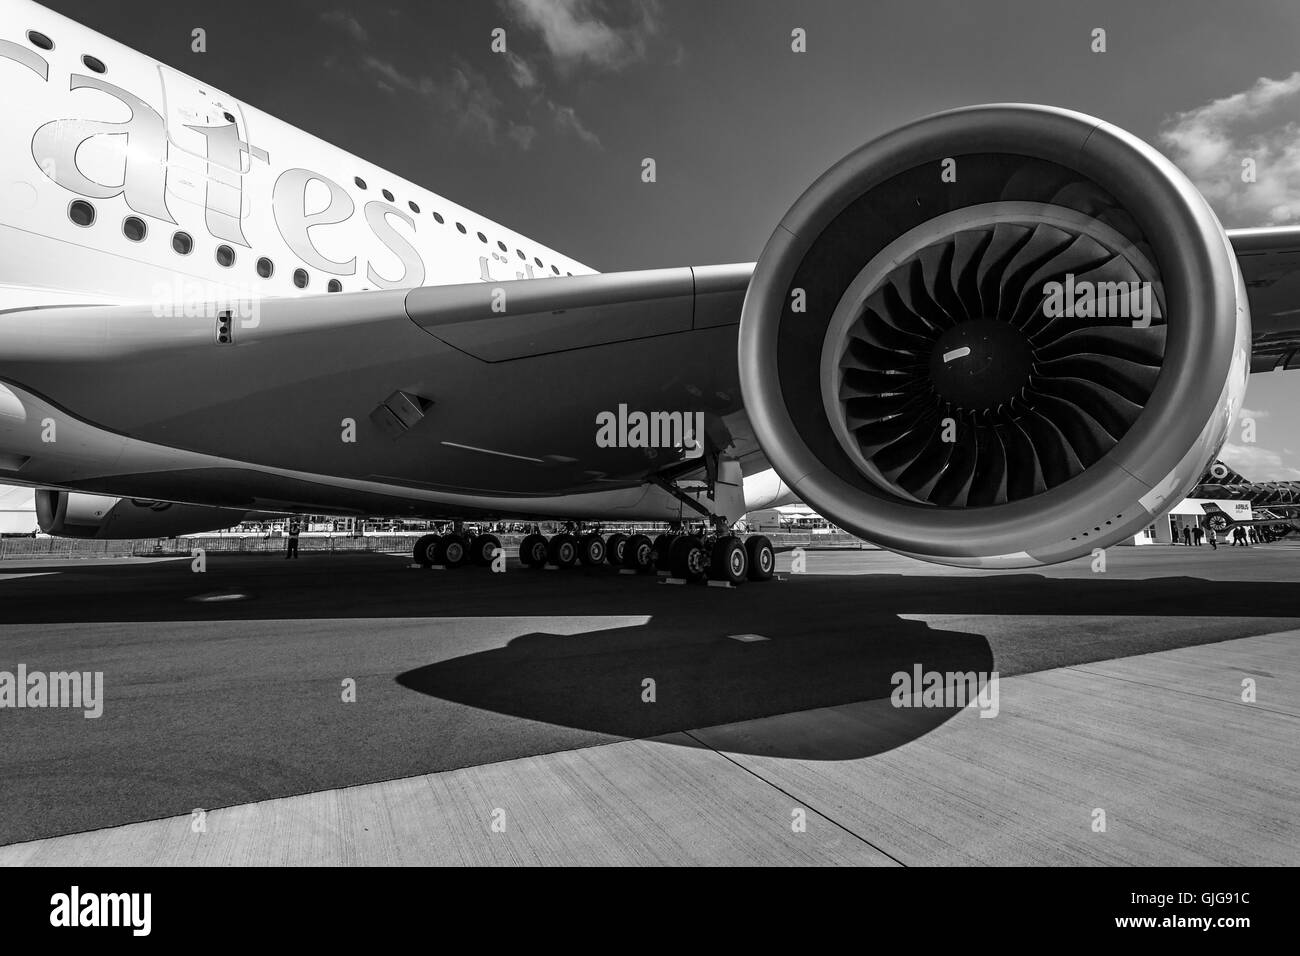 Detail of the wing and a turbofan engine 'Engine Alliance GP7000' of the largest aircraft in the world - Airbus A380. Stock Photo